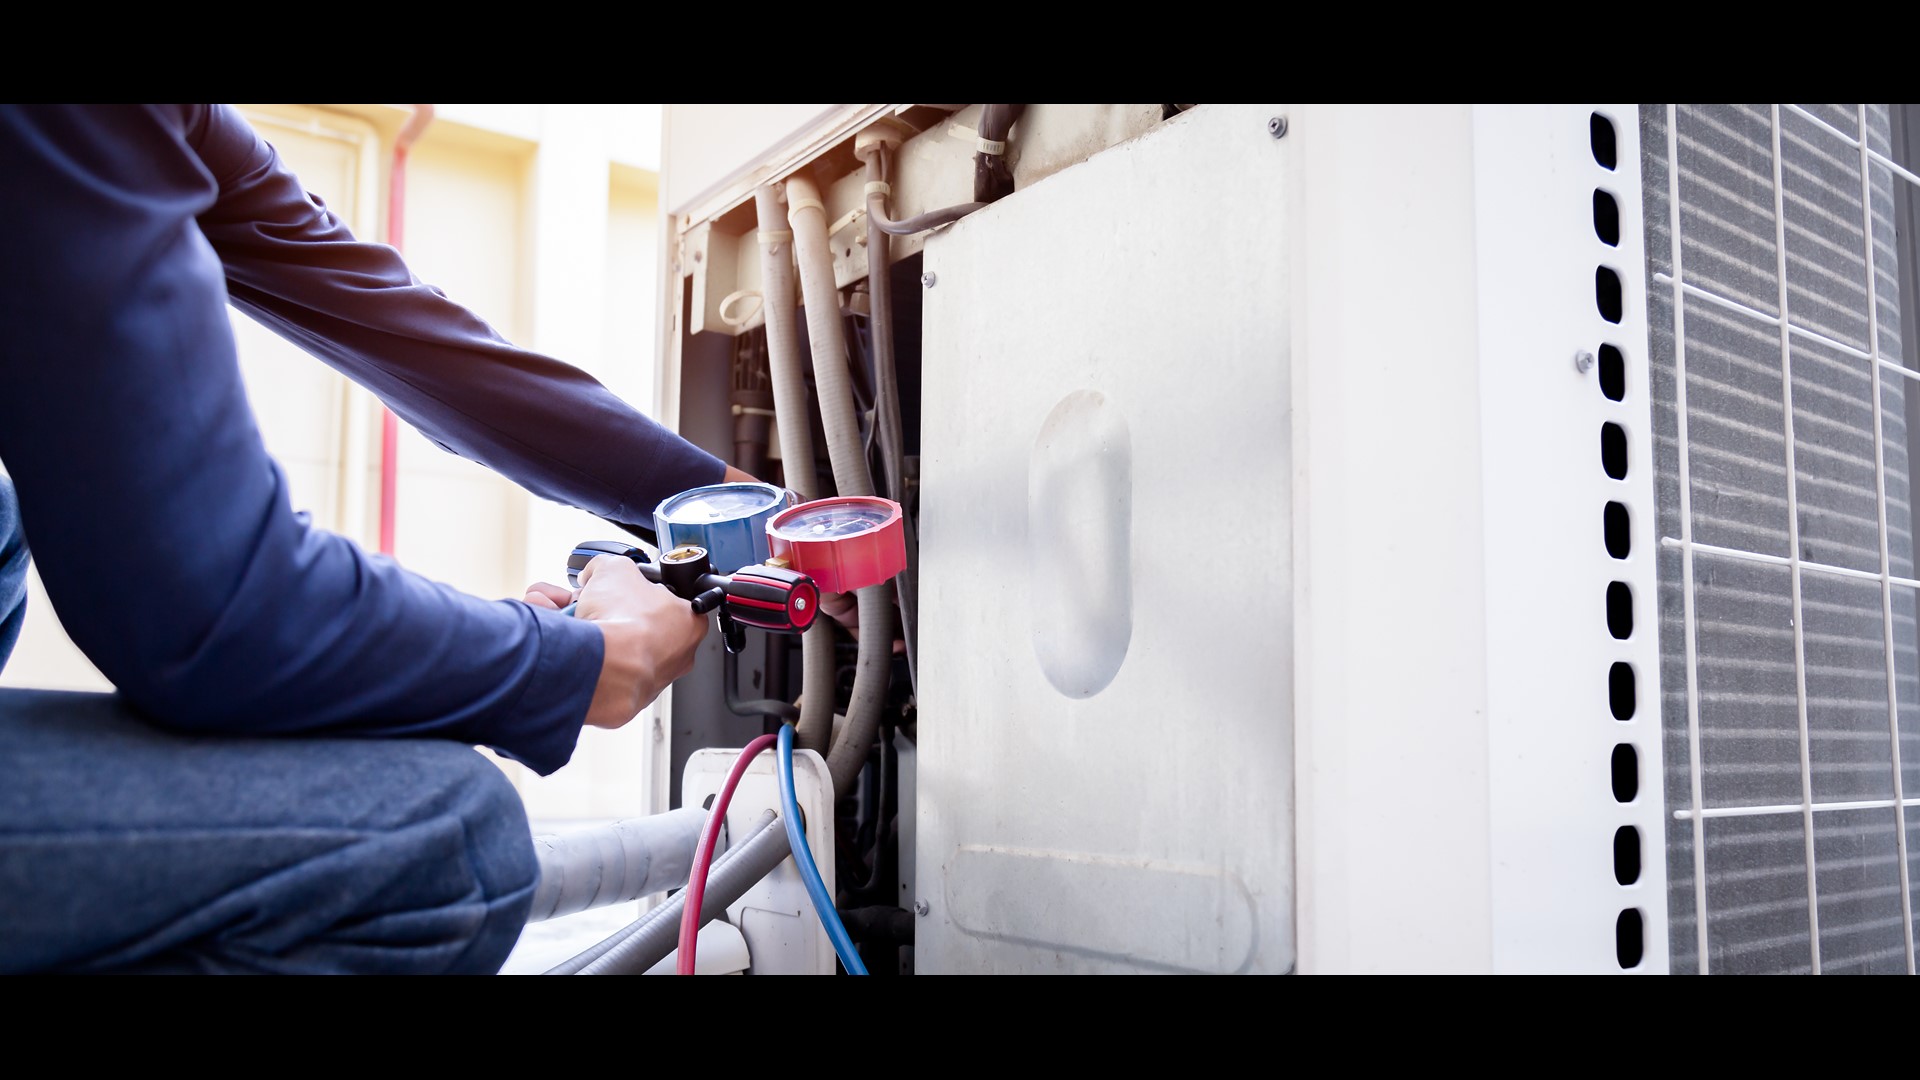 The summer weather is almost here. Now is the time to check your ac system. We talk with A-1 American Plumbing, Heating and Air Conditioning for some tips & tricks.